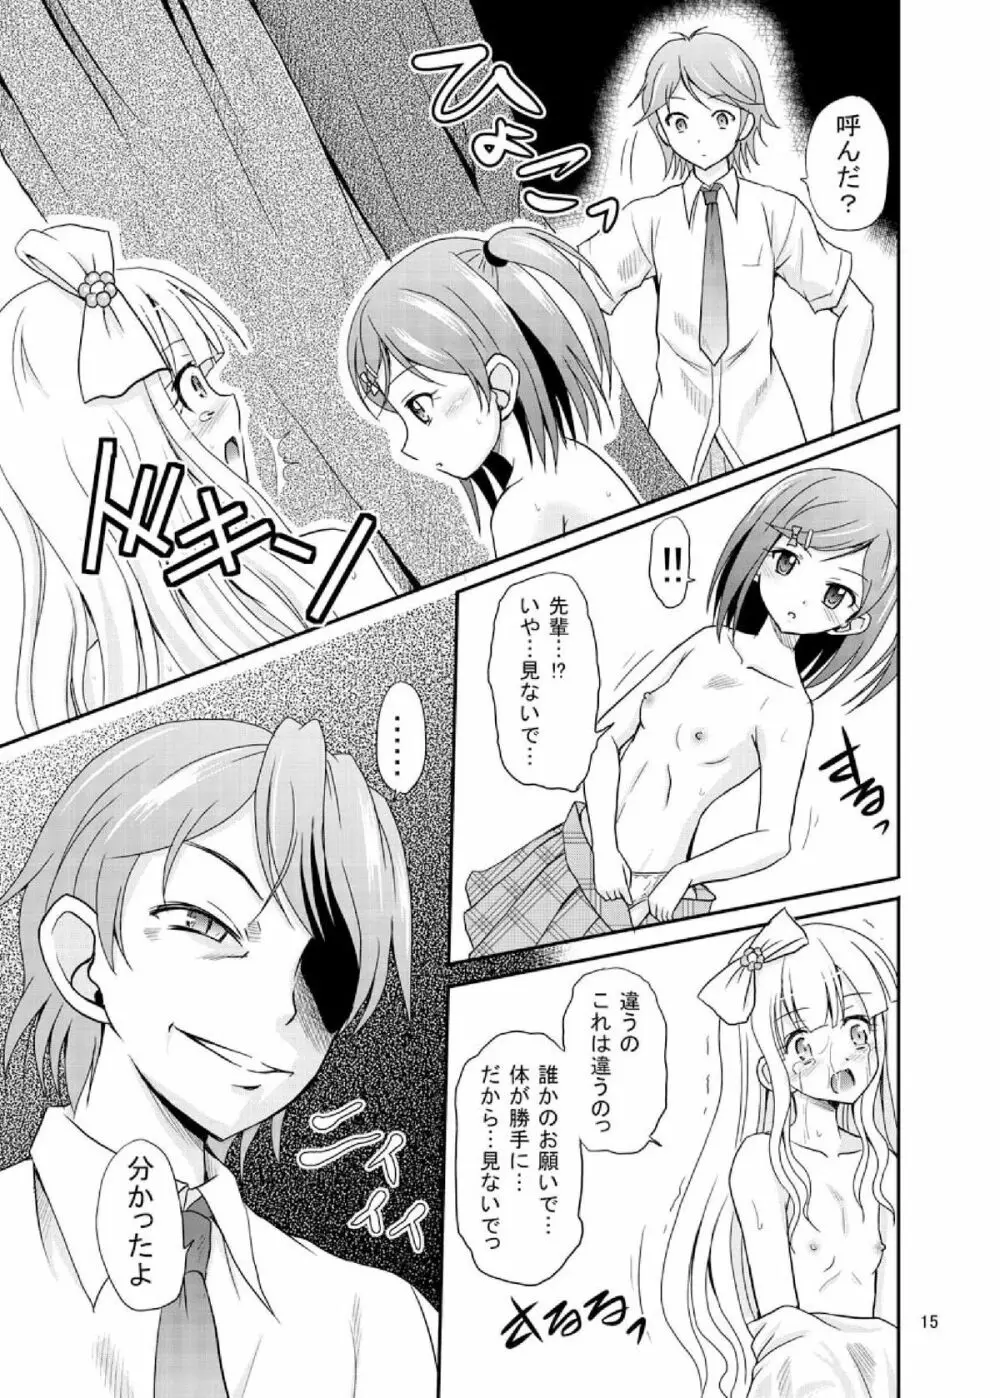 ARCANUMS 20 配信はじめました - page15